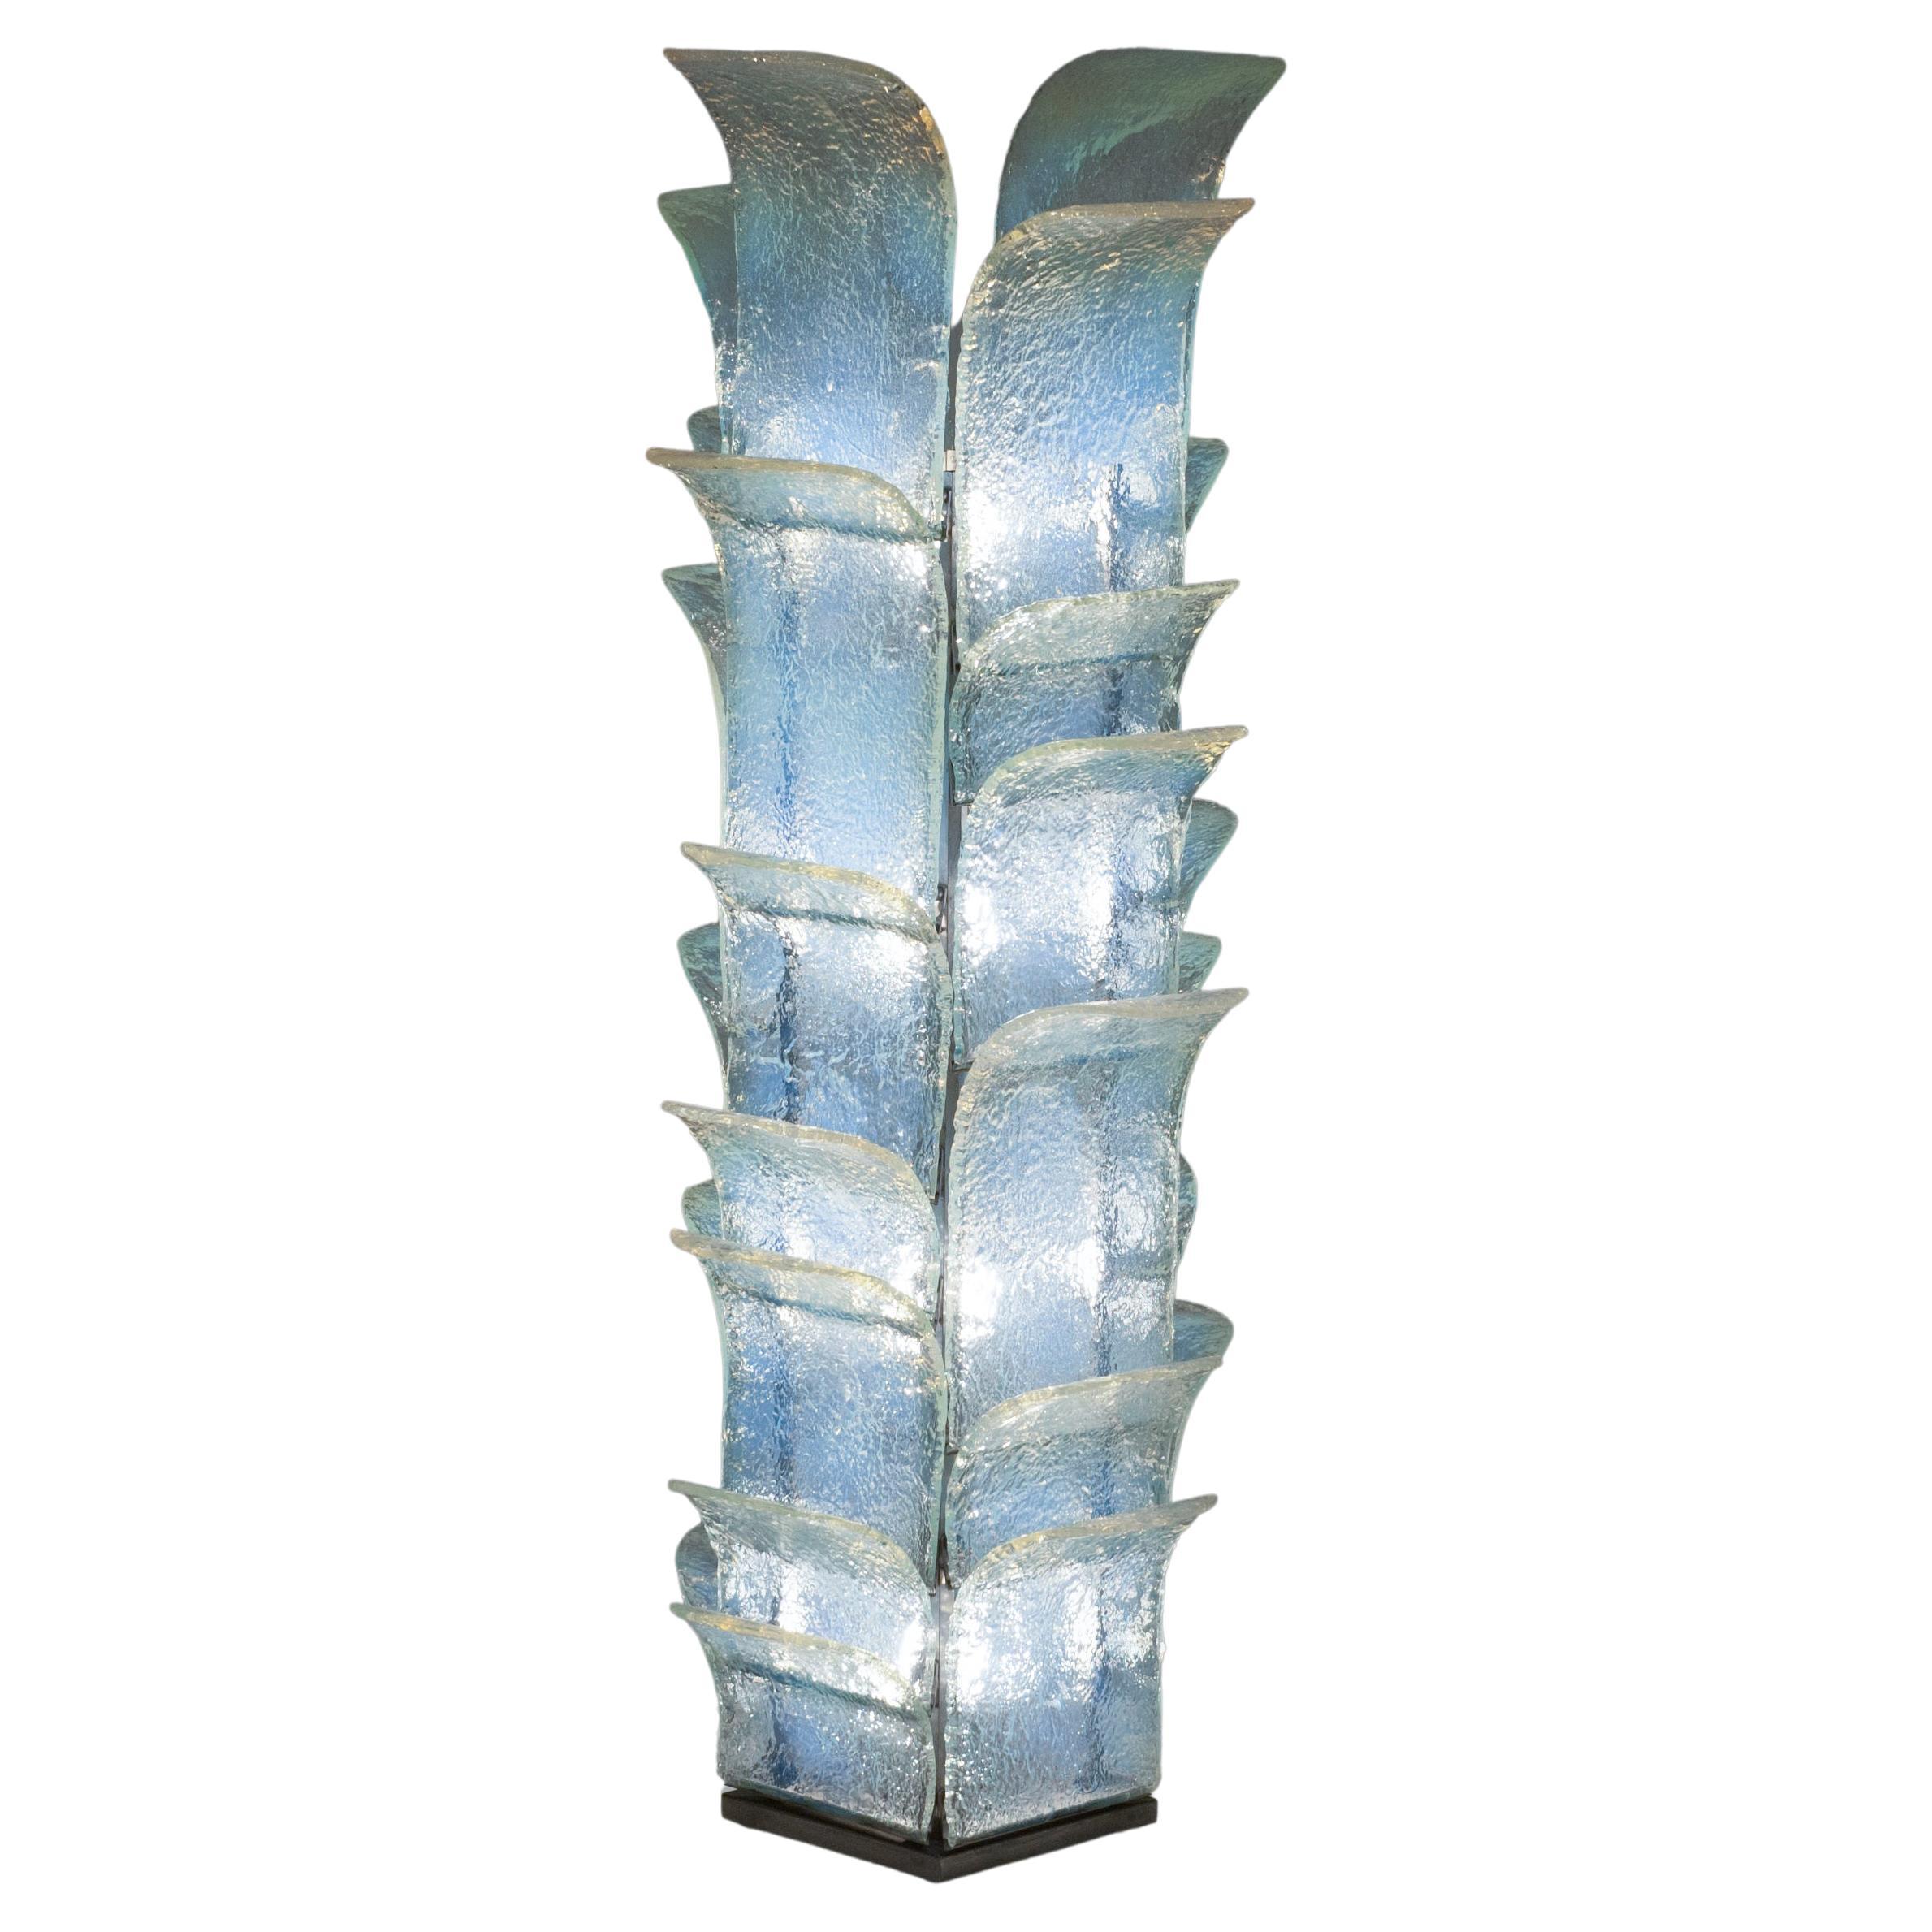 Midcentury Cactus Floor Lamp by Carlo Nason for Mazzega Opalescent Glass 1960s